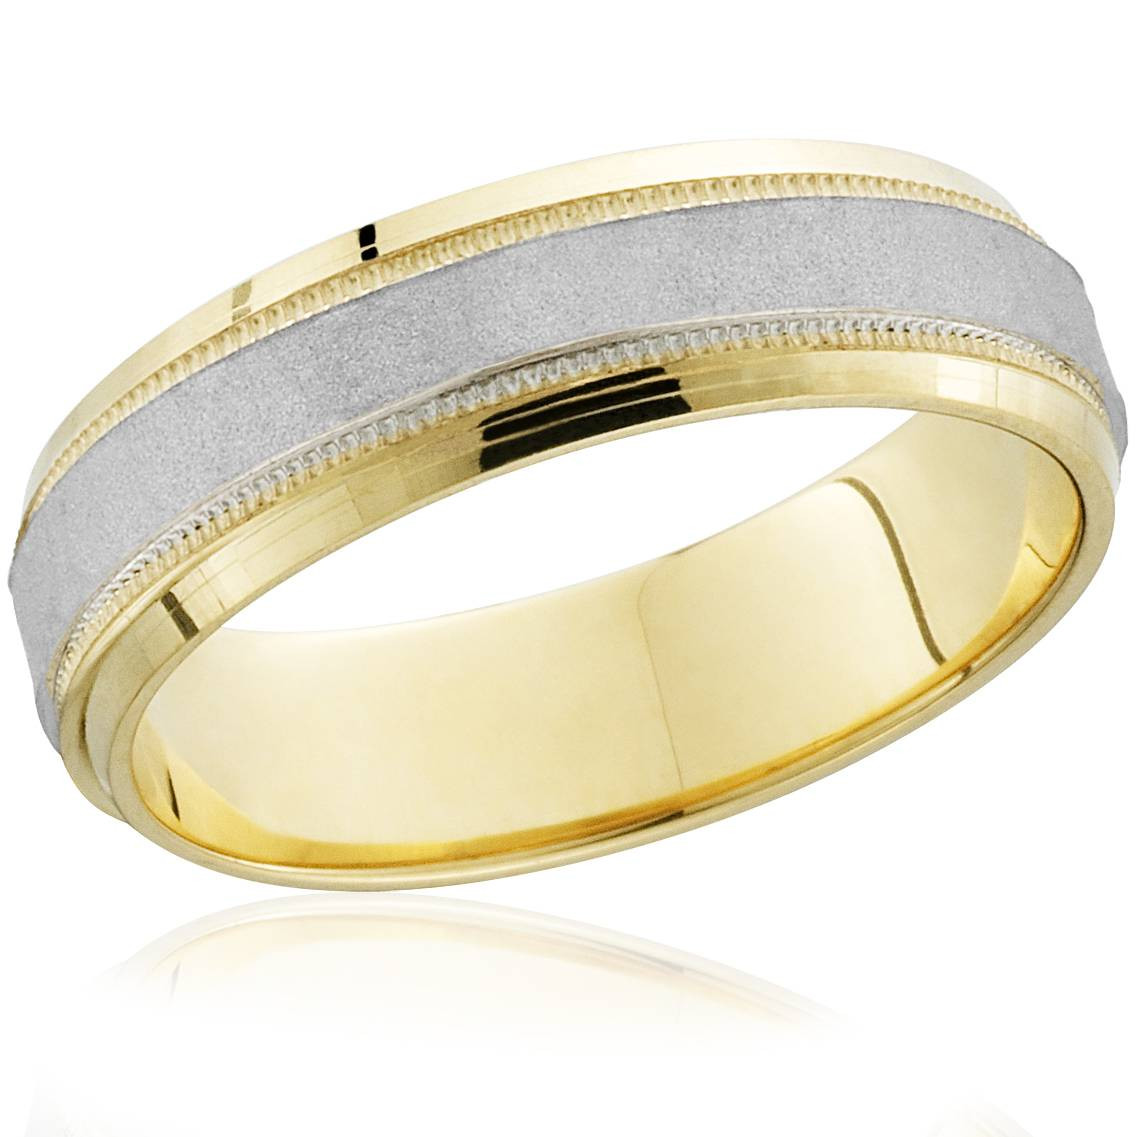 Yellow Gold Wedding Bands For Men
 Mens Hammered Two Tone 14k White & Yellow Gold Wedding